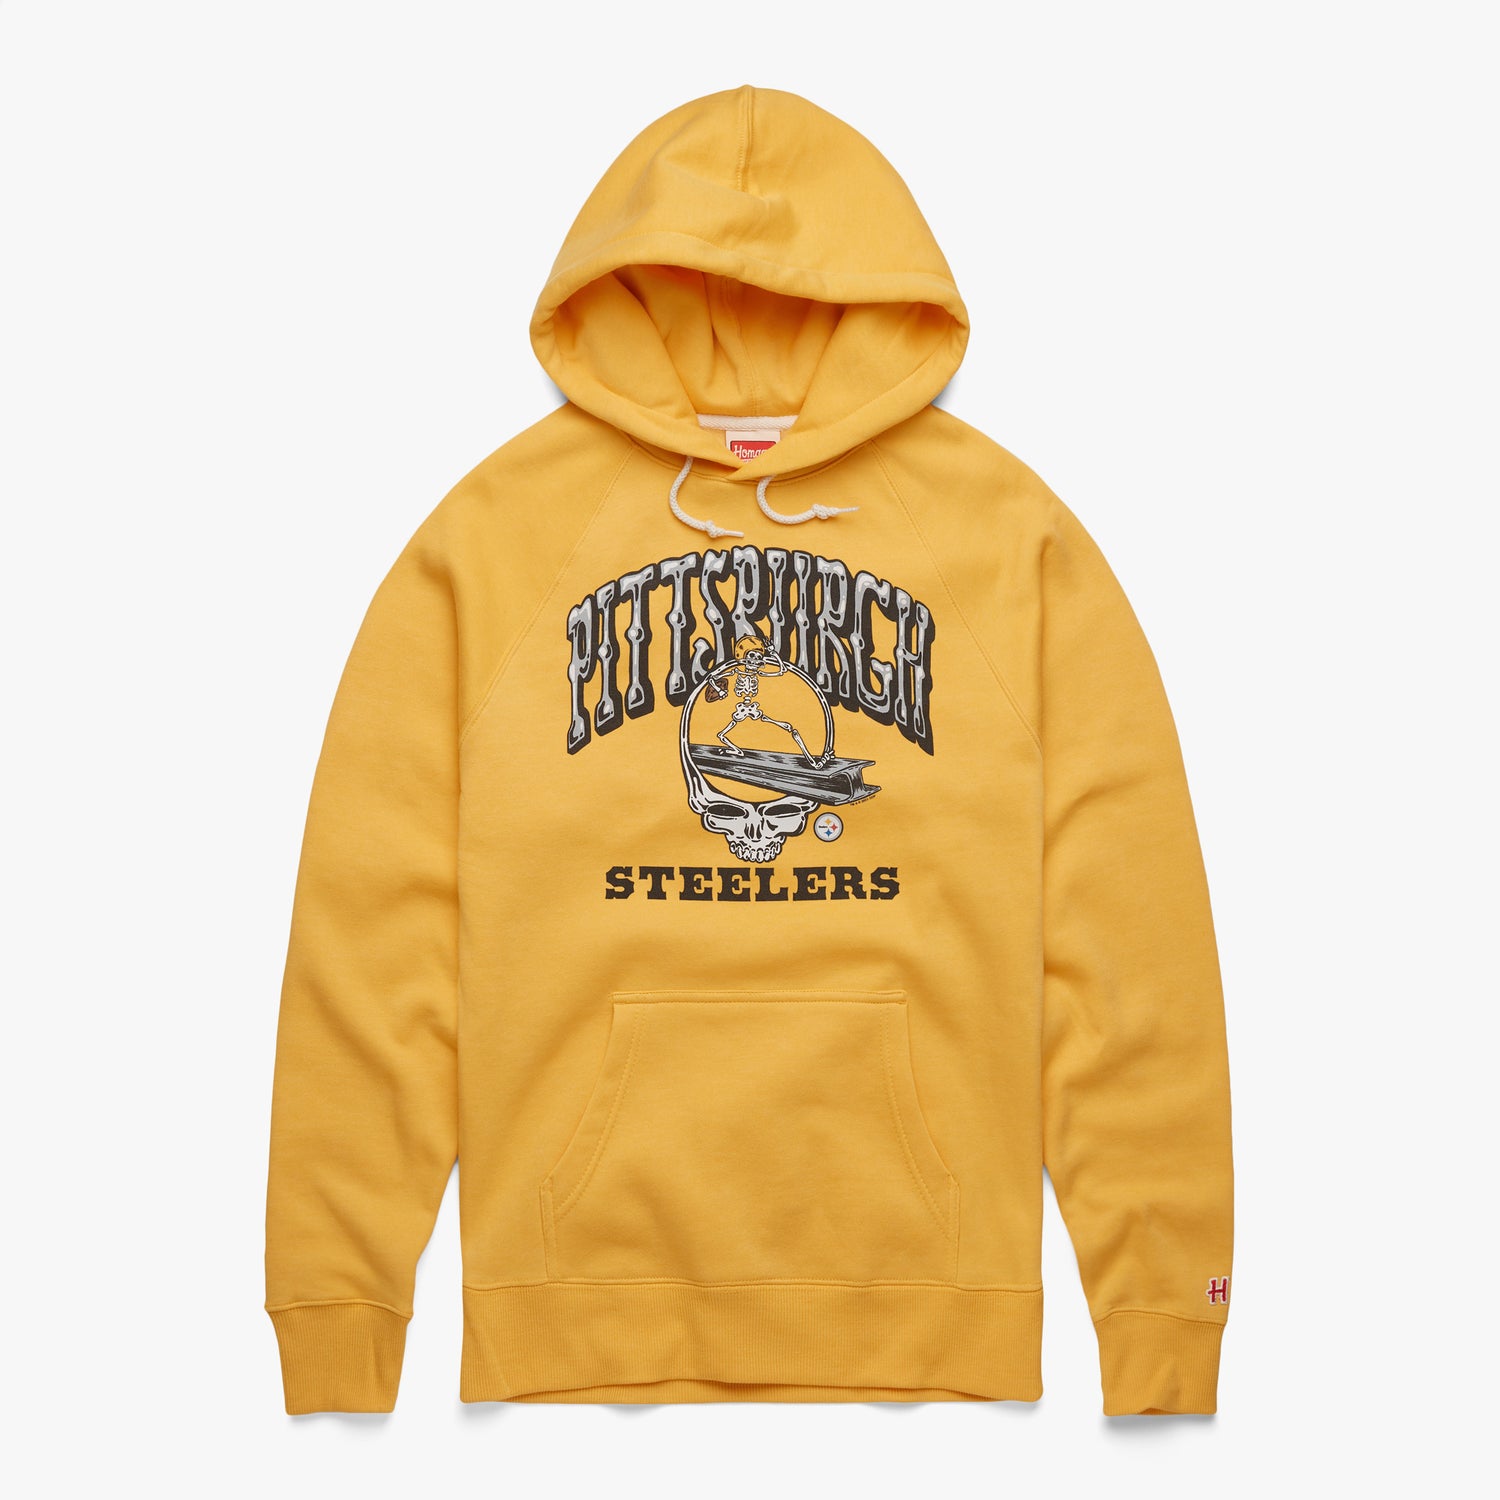 NFL x Grateful Dead x Pittsburgh Steelers Hoodie from Homage. | Officially Licensed Vintage NFL Apparel from Homage Pro Shop.